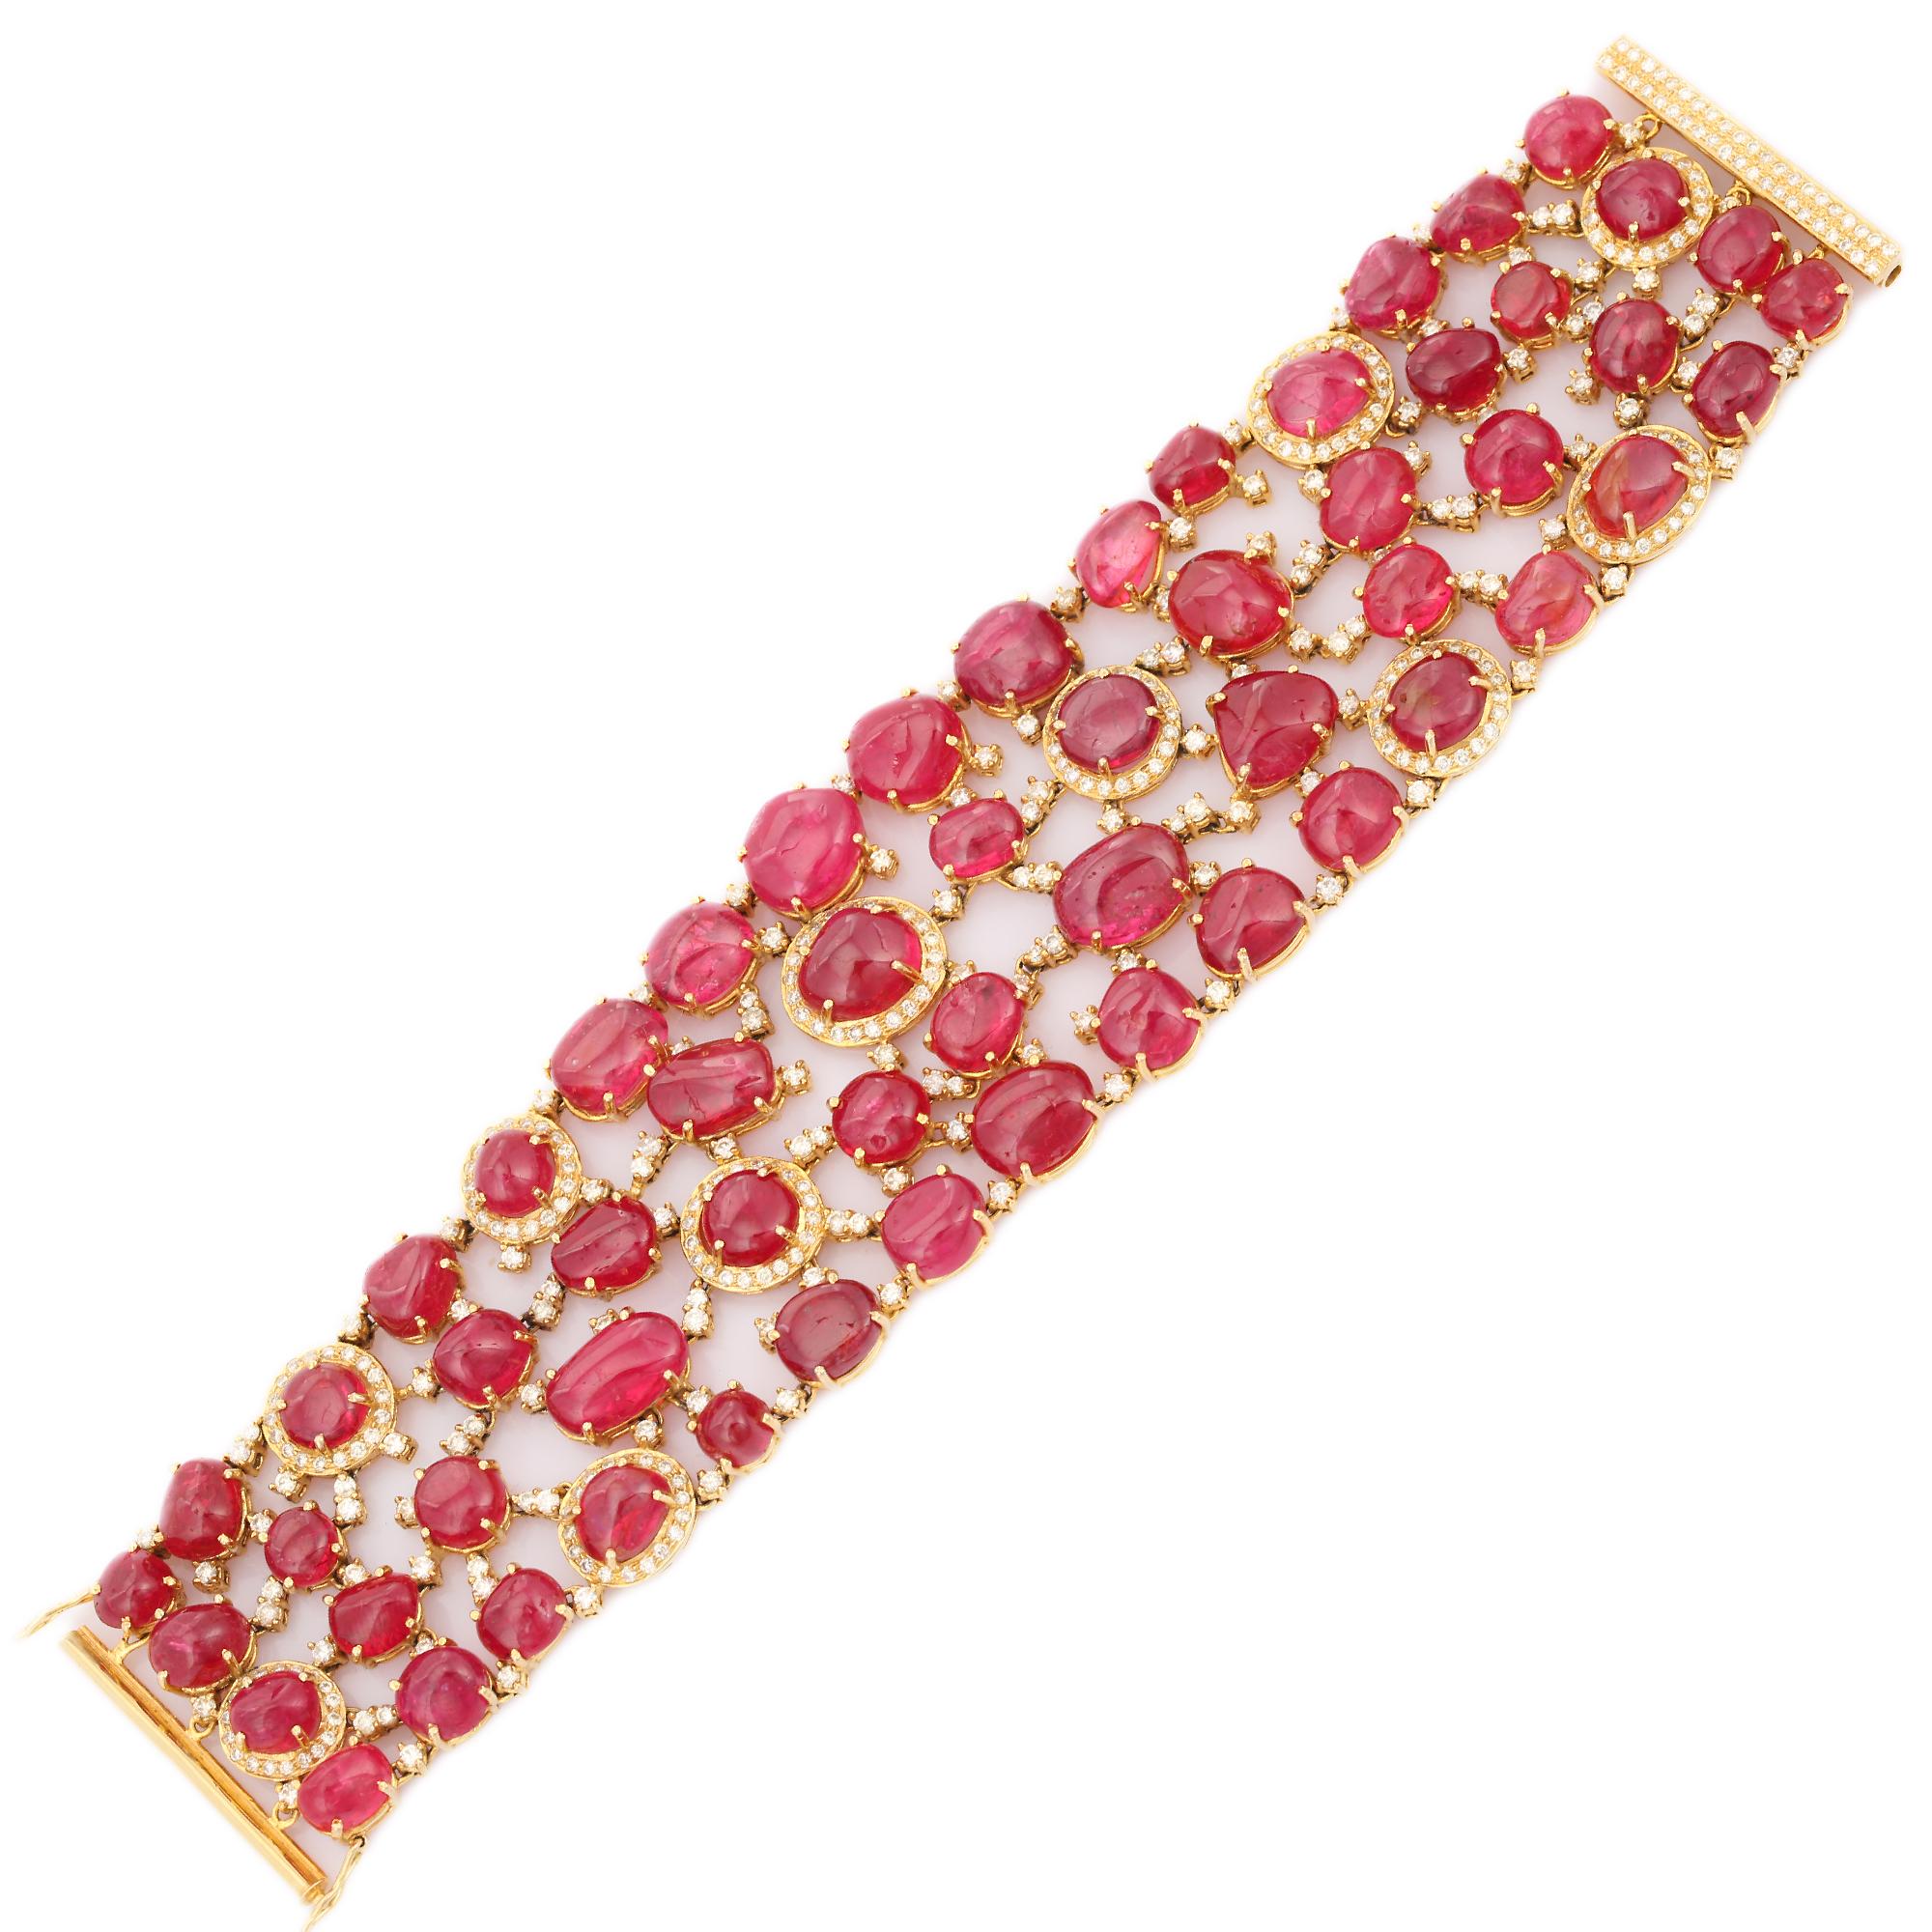 This Statement Ruby Diamond Bracelet in 18K gold showcases 58 endlessly sparkling natural ruby, weighing 207.68 carats and 144 pieces of diamonds weighing 7.72 carats. It measures 7.5 inches long in length. 
Ruby gemstone improves mental